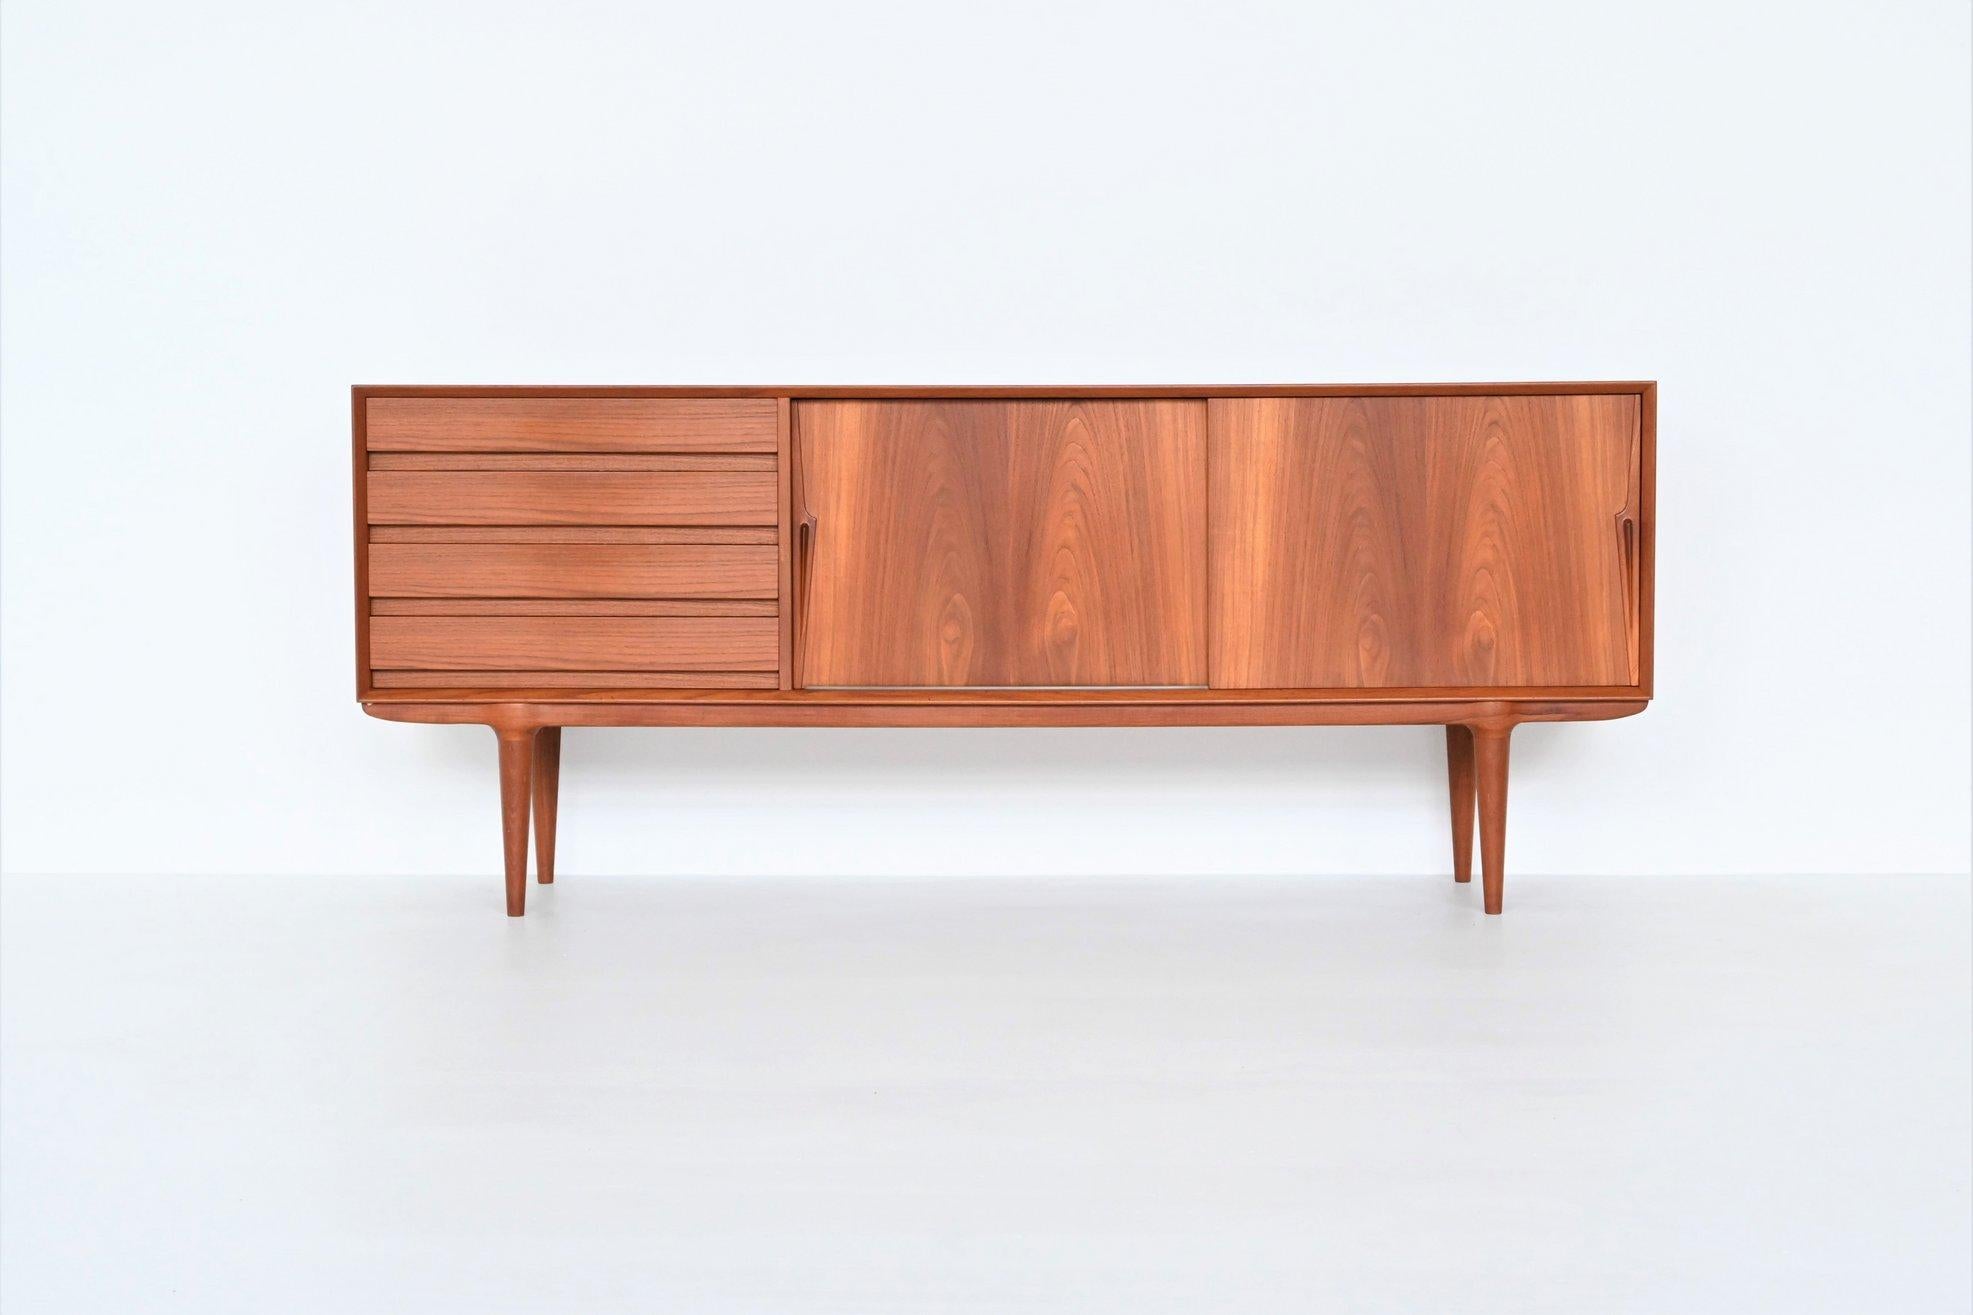 Beautiful sideboard model 18 designed by Gunni Omann and manufactured by Omann Jun, Denmark 1960. Superb example of Danish refined furniture. This teak wood credenza features wonderful details and great craftsmanship which Omann Jun and Gunni Omann